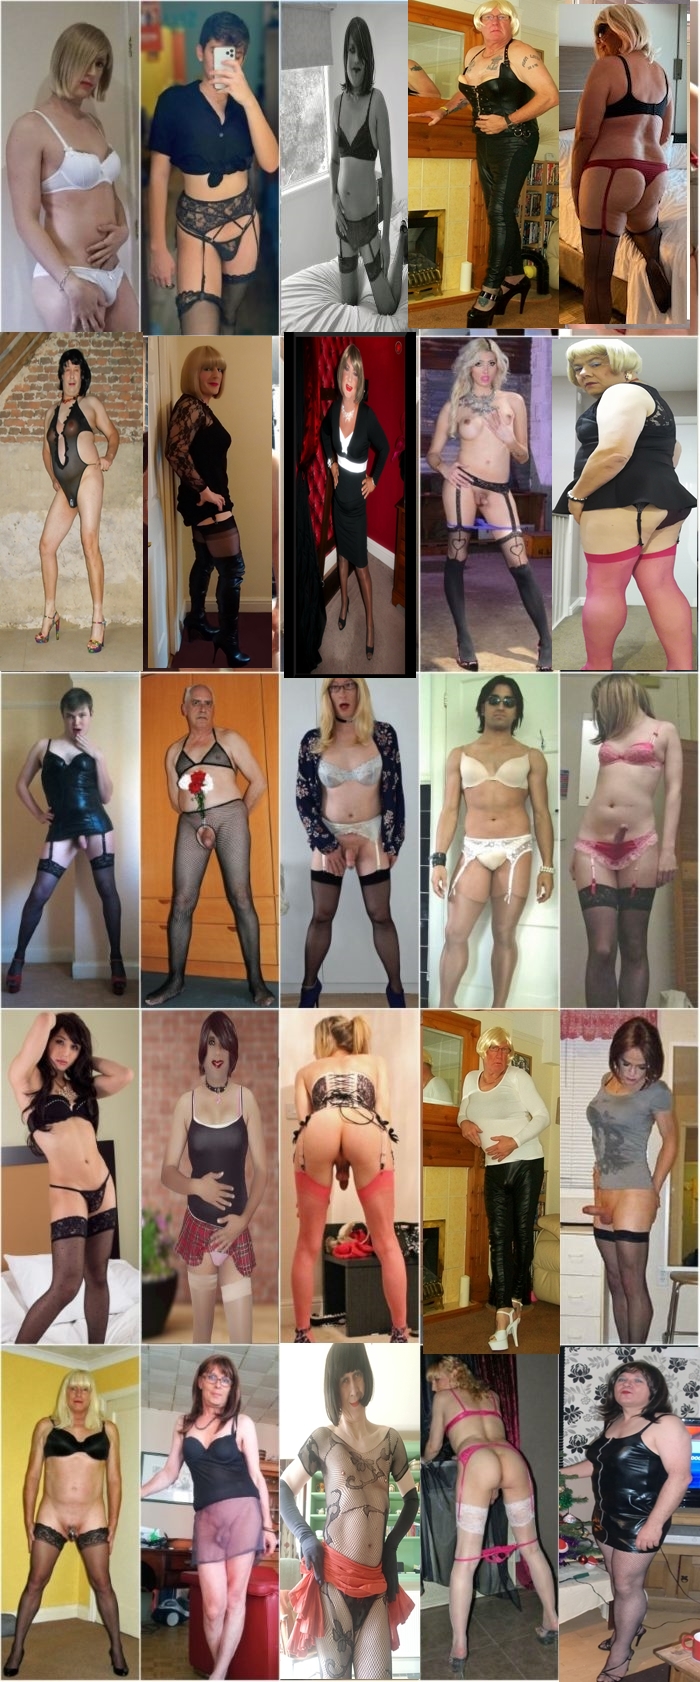 A bunch of sissies….please expose wherever you can